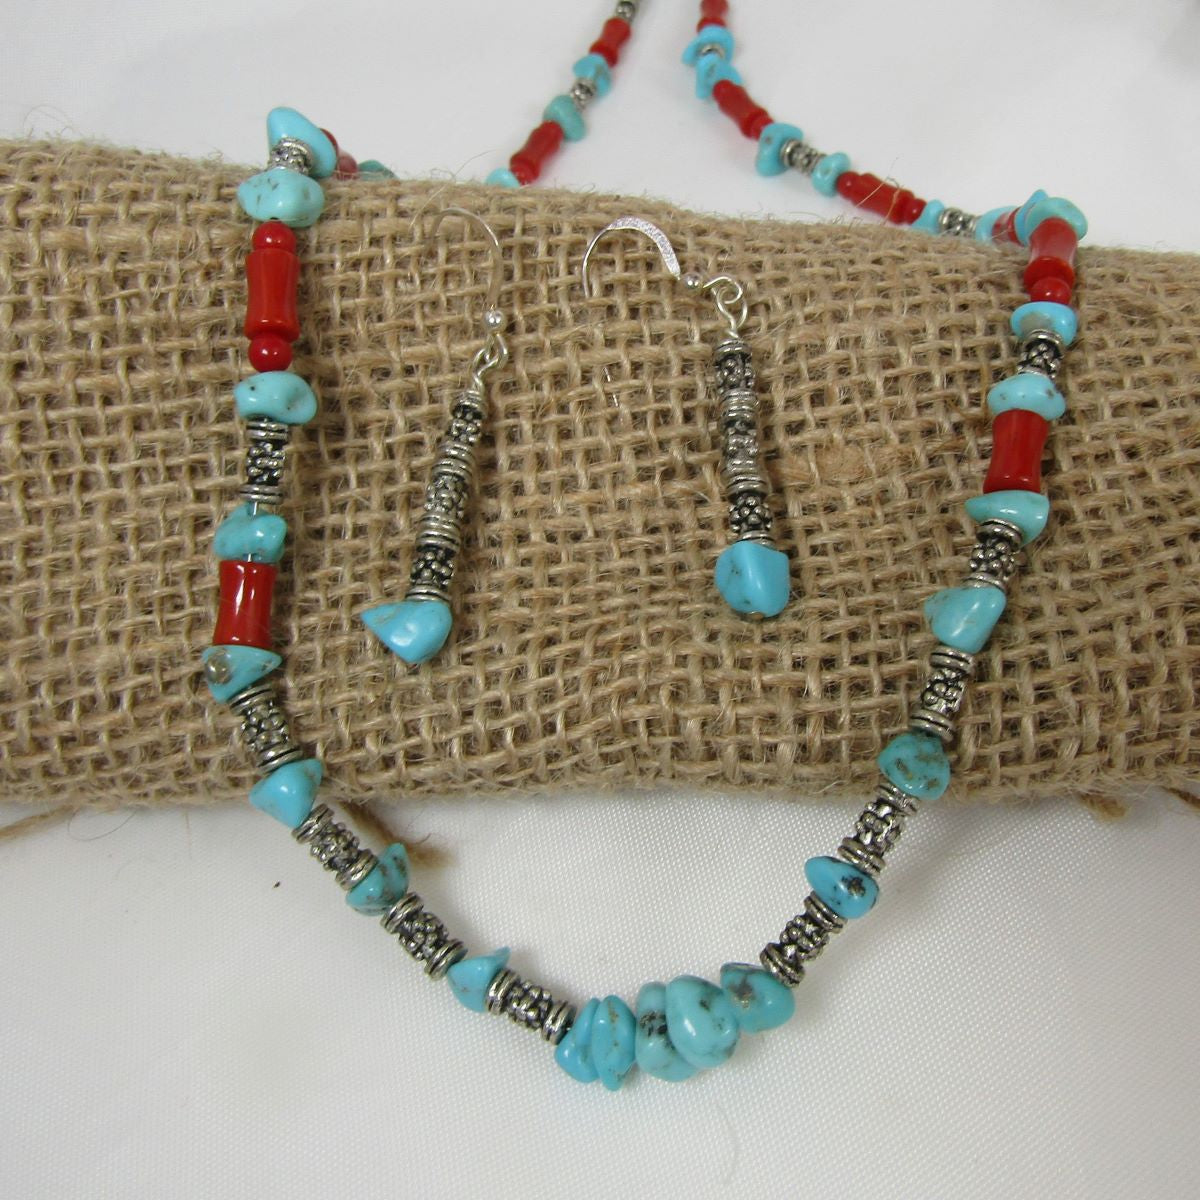 Handmade Turquoise & Silver Necklace and Earrings